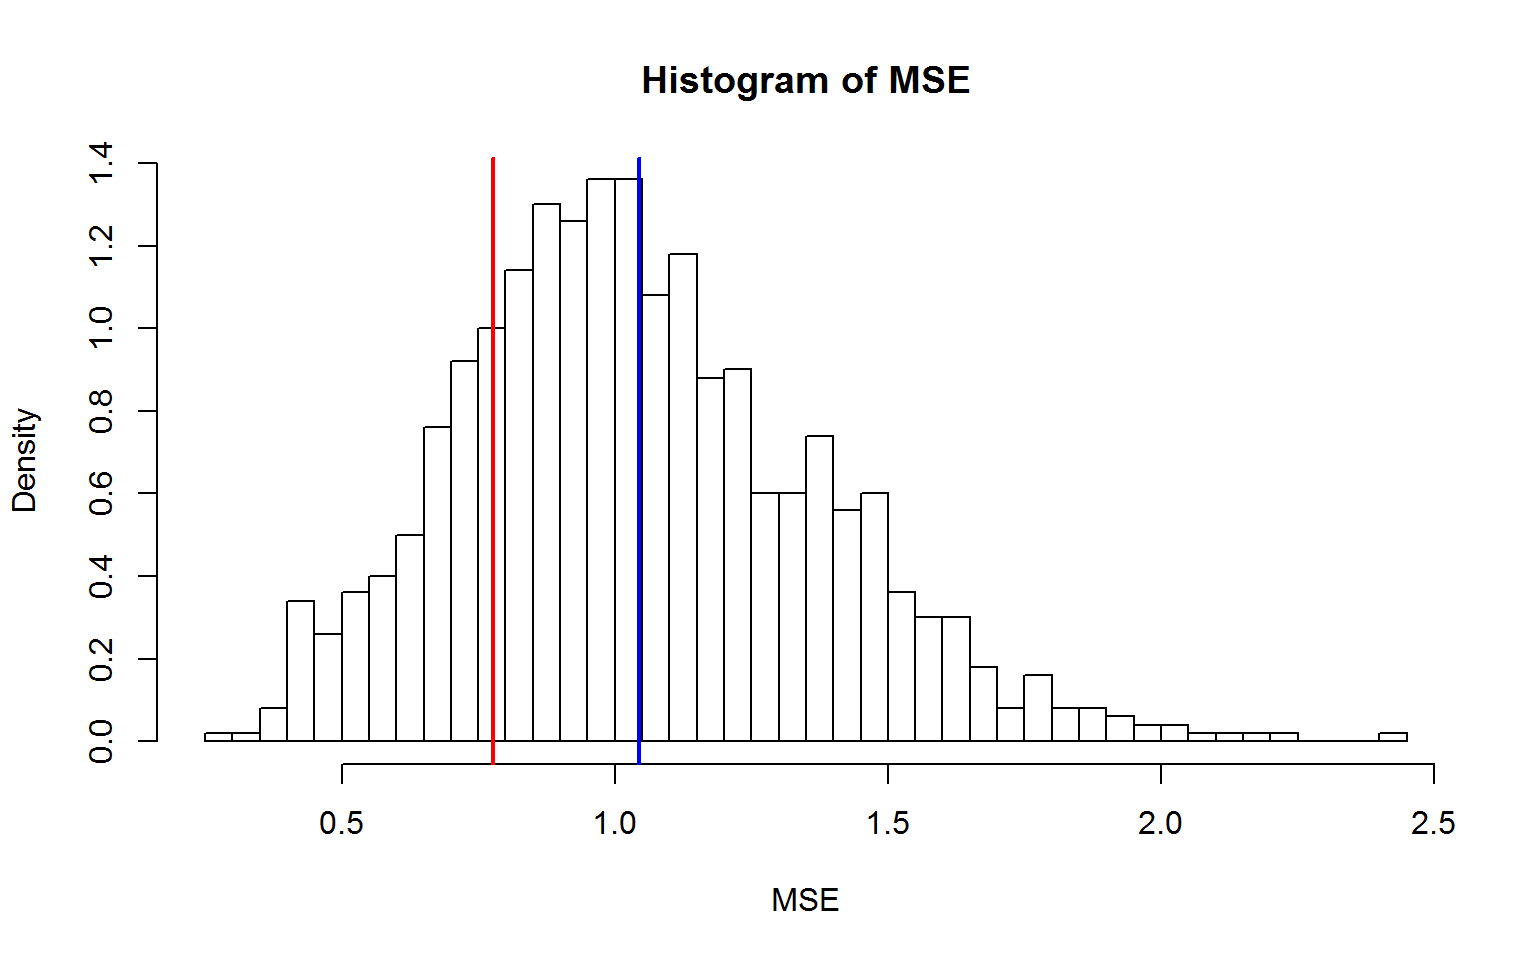 Histogram of MSE